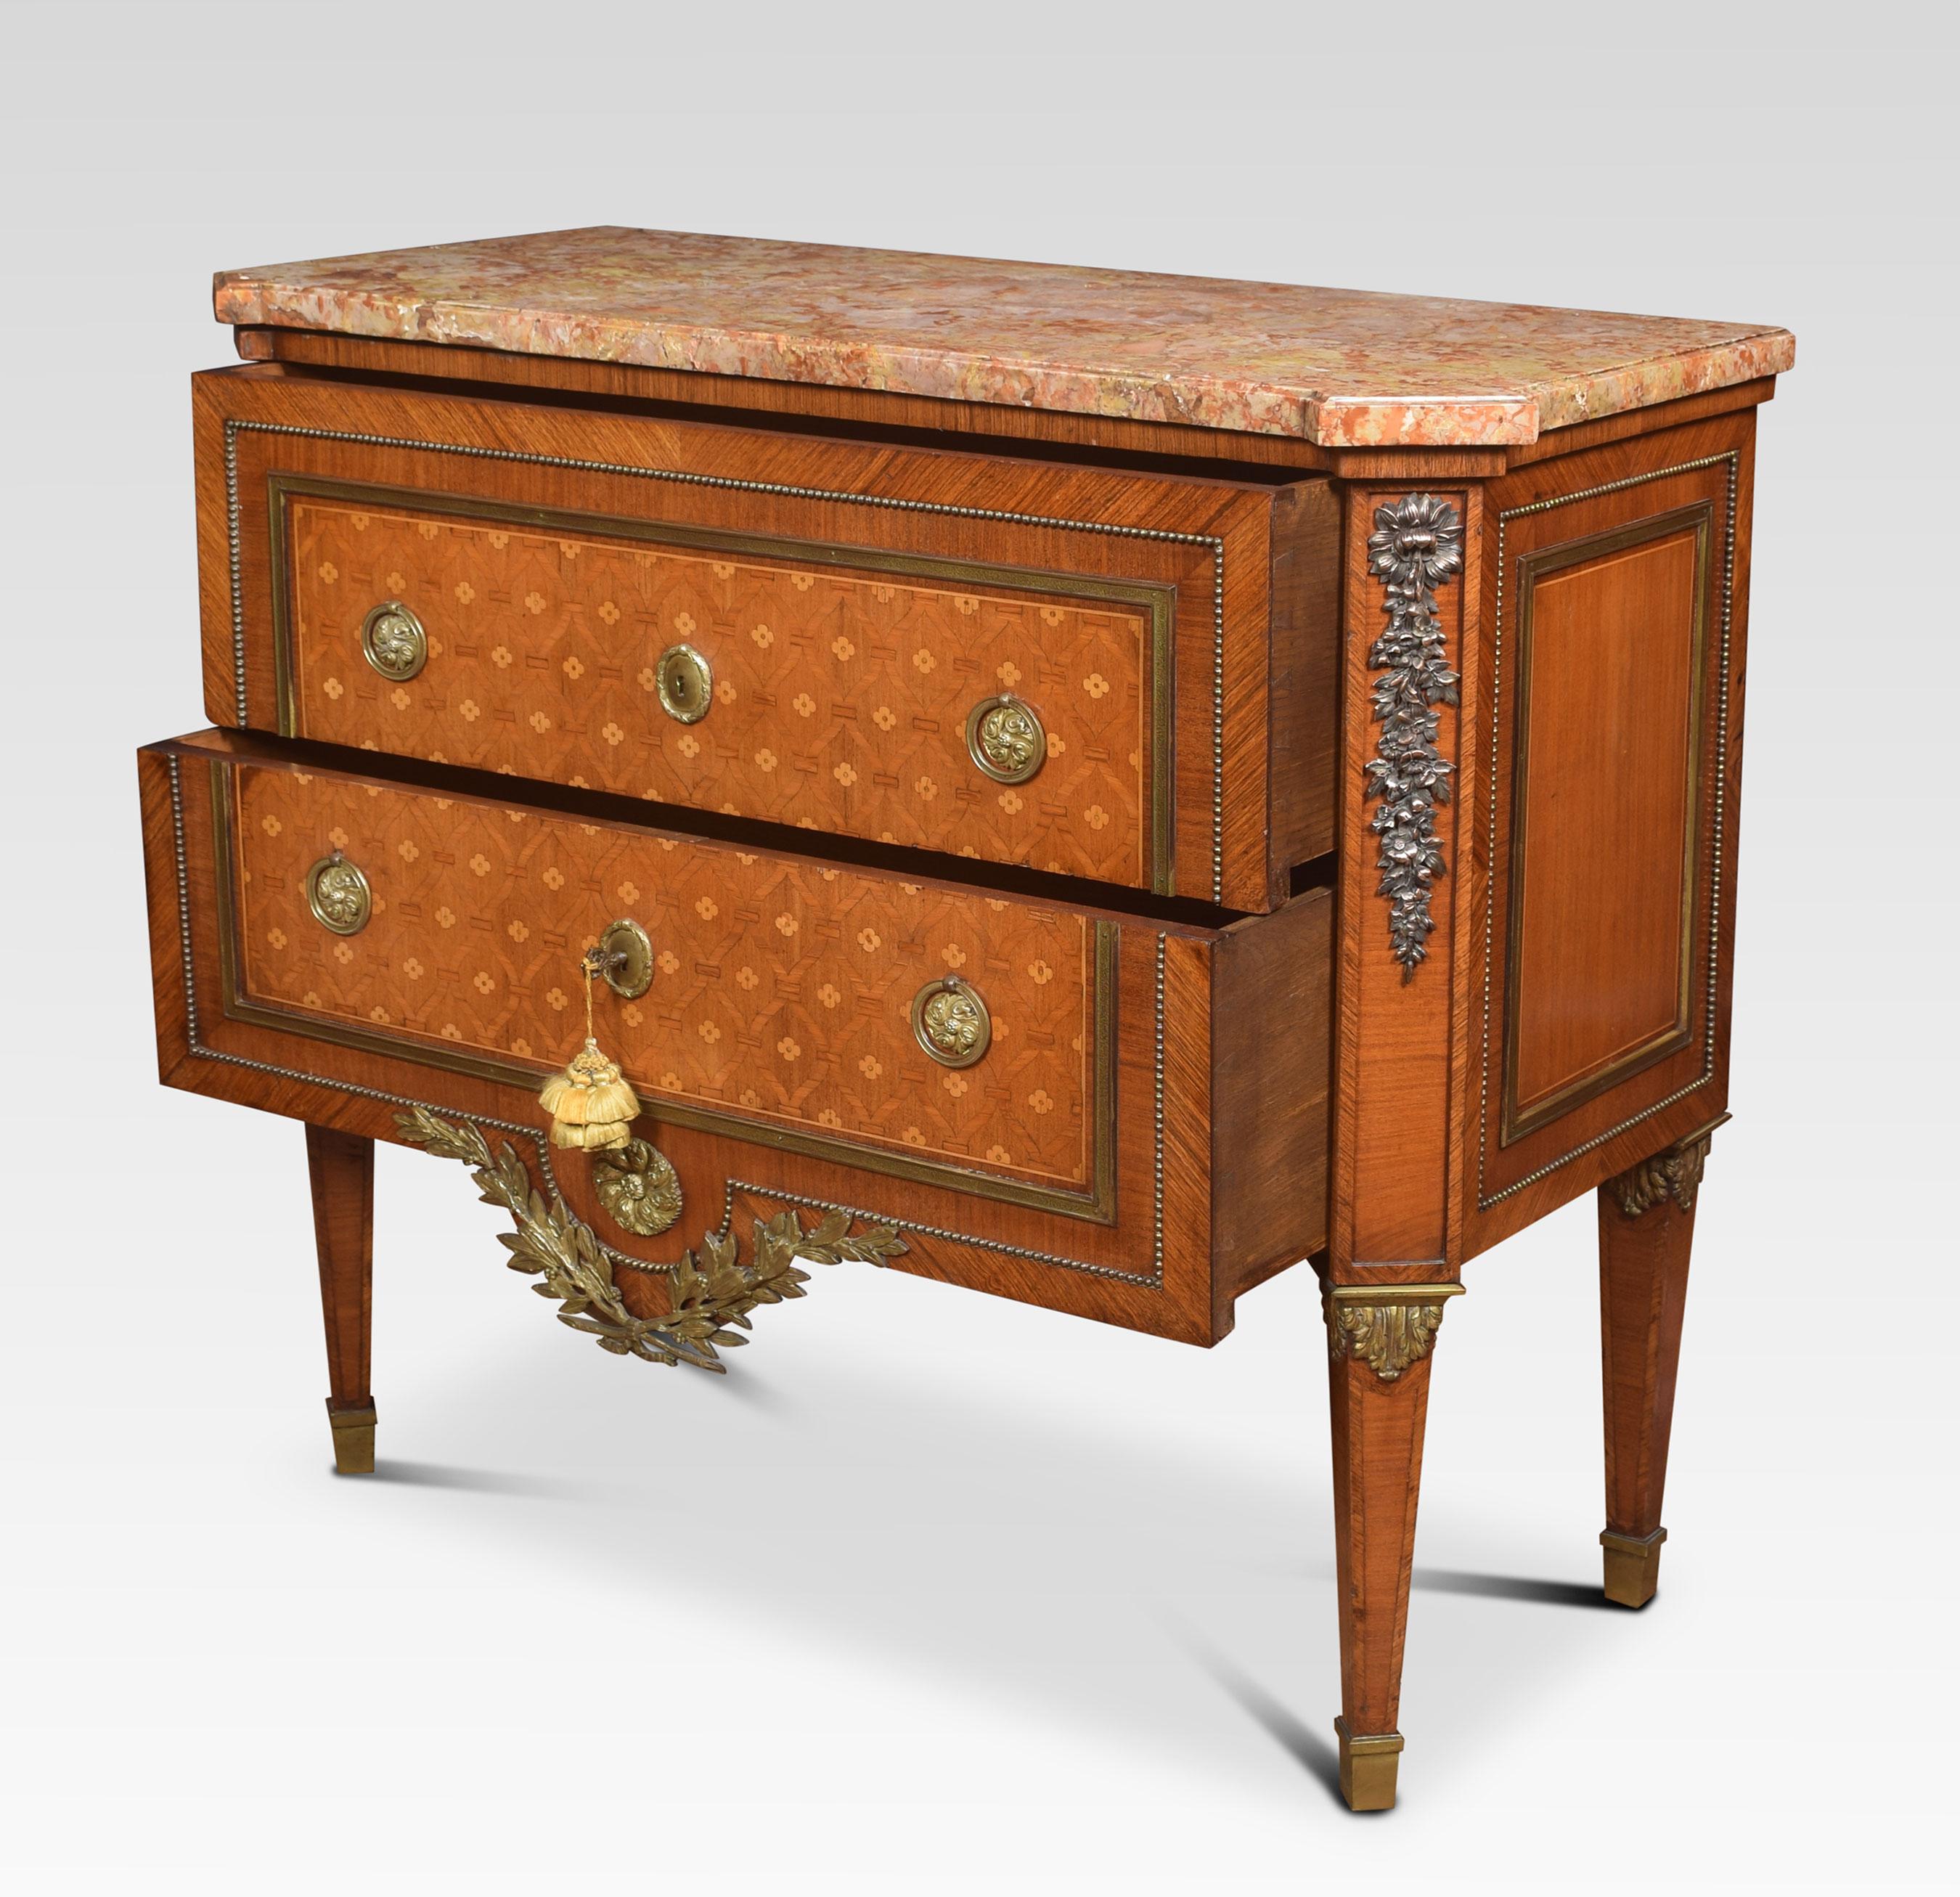 20th Century Neoclassical Parquetry Marble-Topped Commode